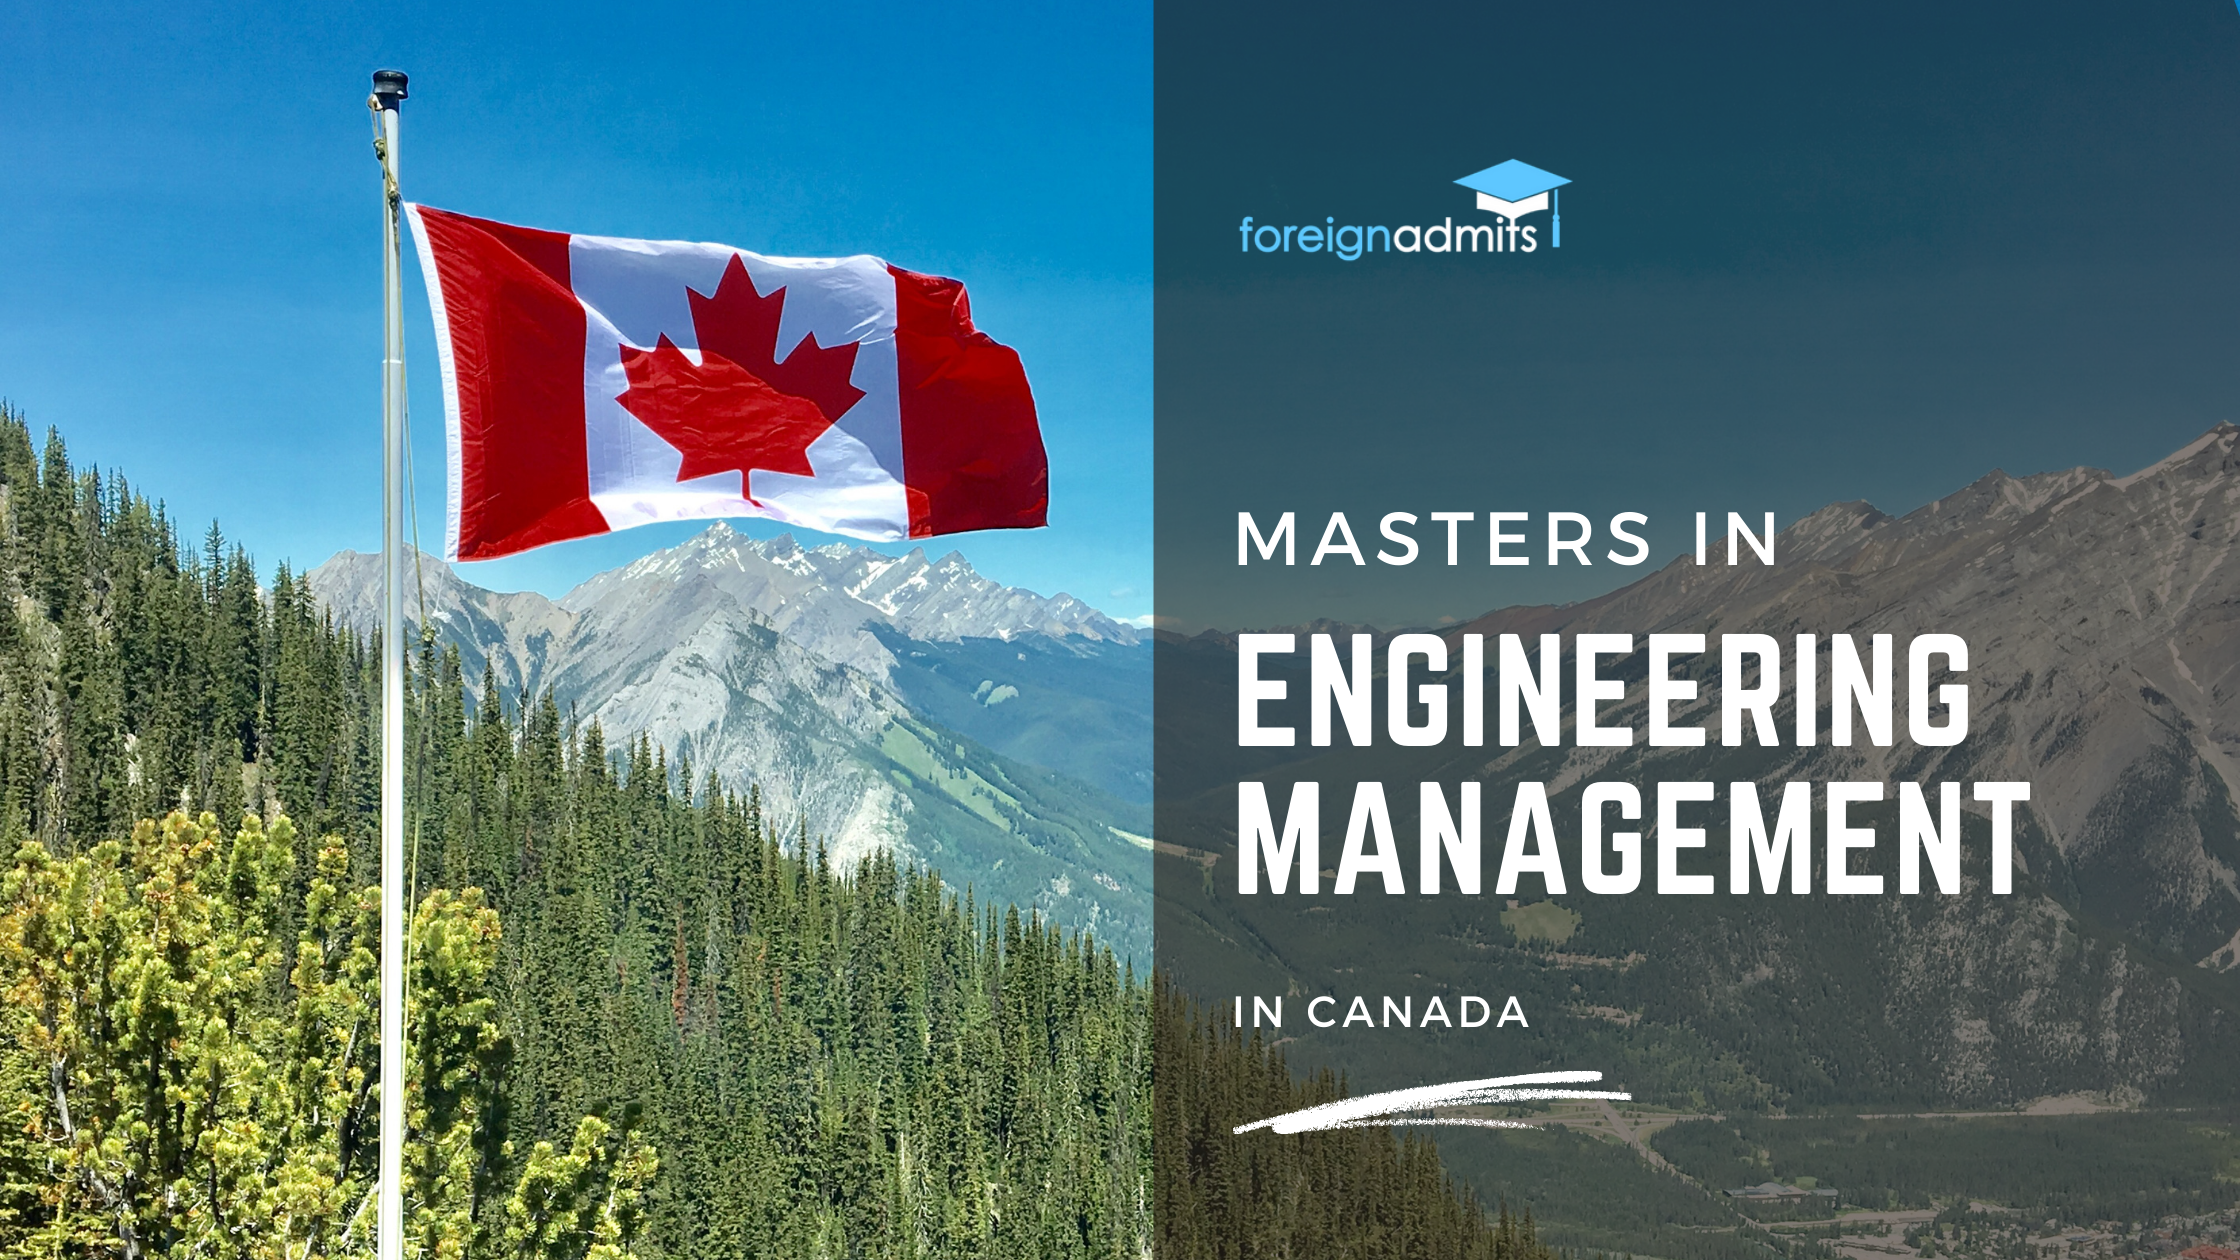 Masters of Engineering Management in Canada